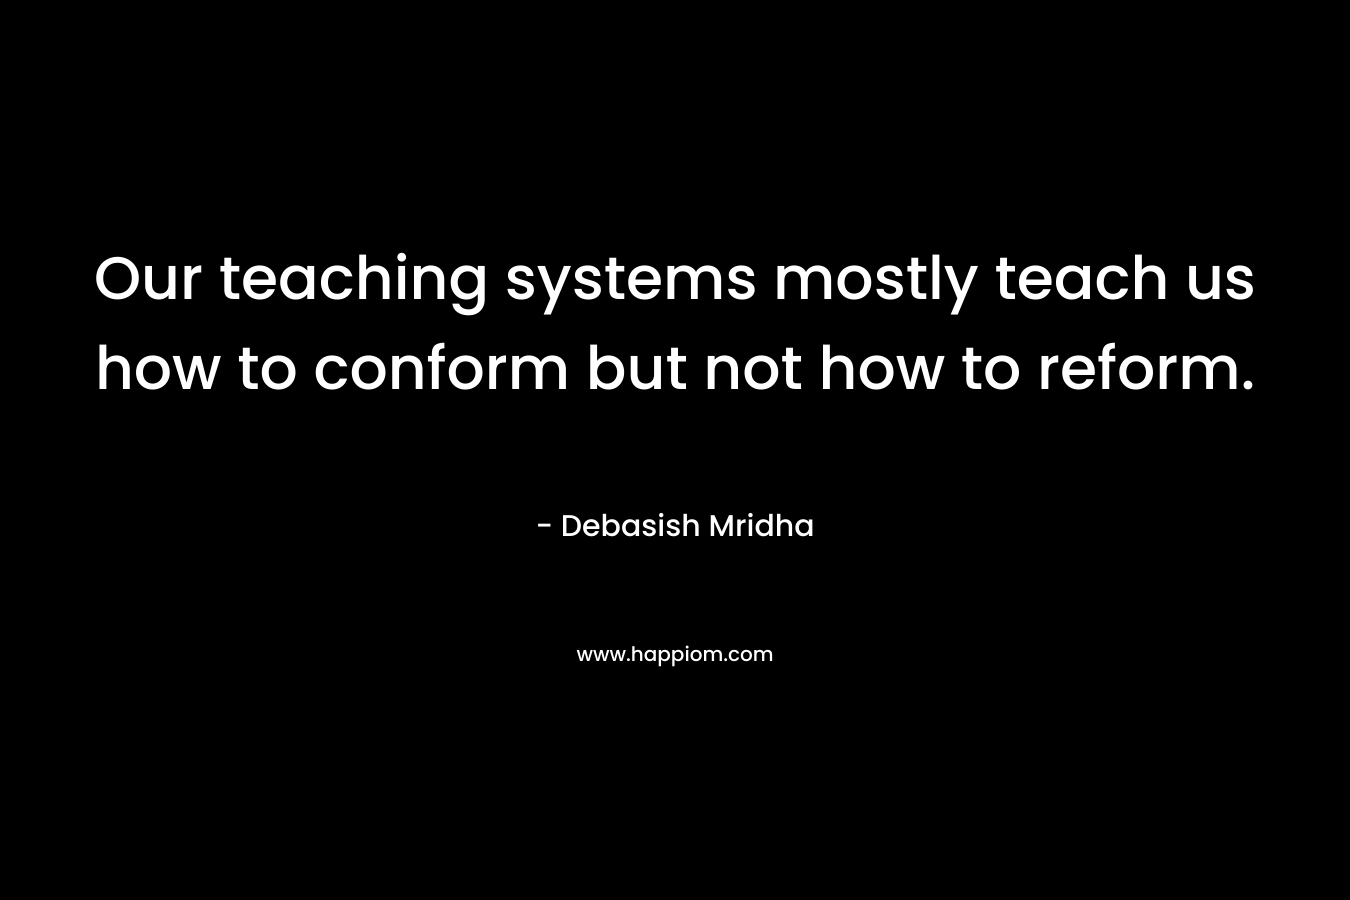 Our teaching systems mostly teach us how to conform but not how to reform. – Debasish Mridha